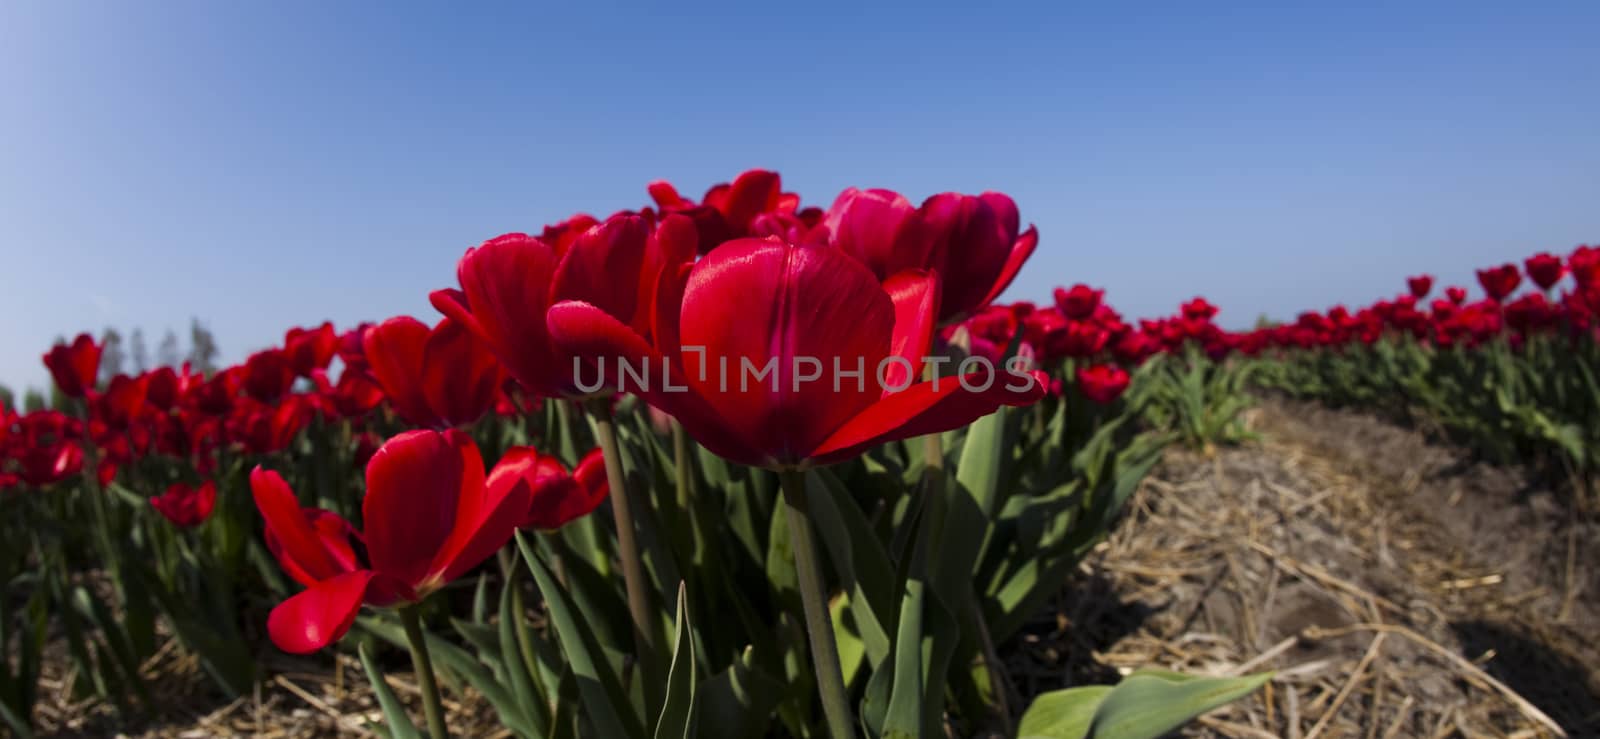 Flowers are blooming on the field, tulips